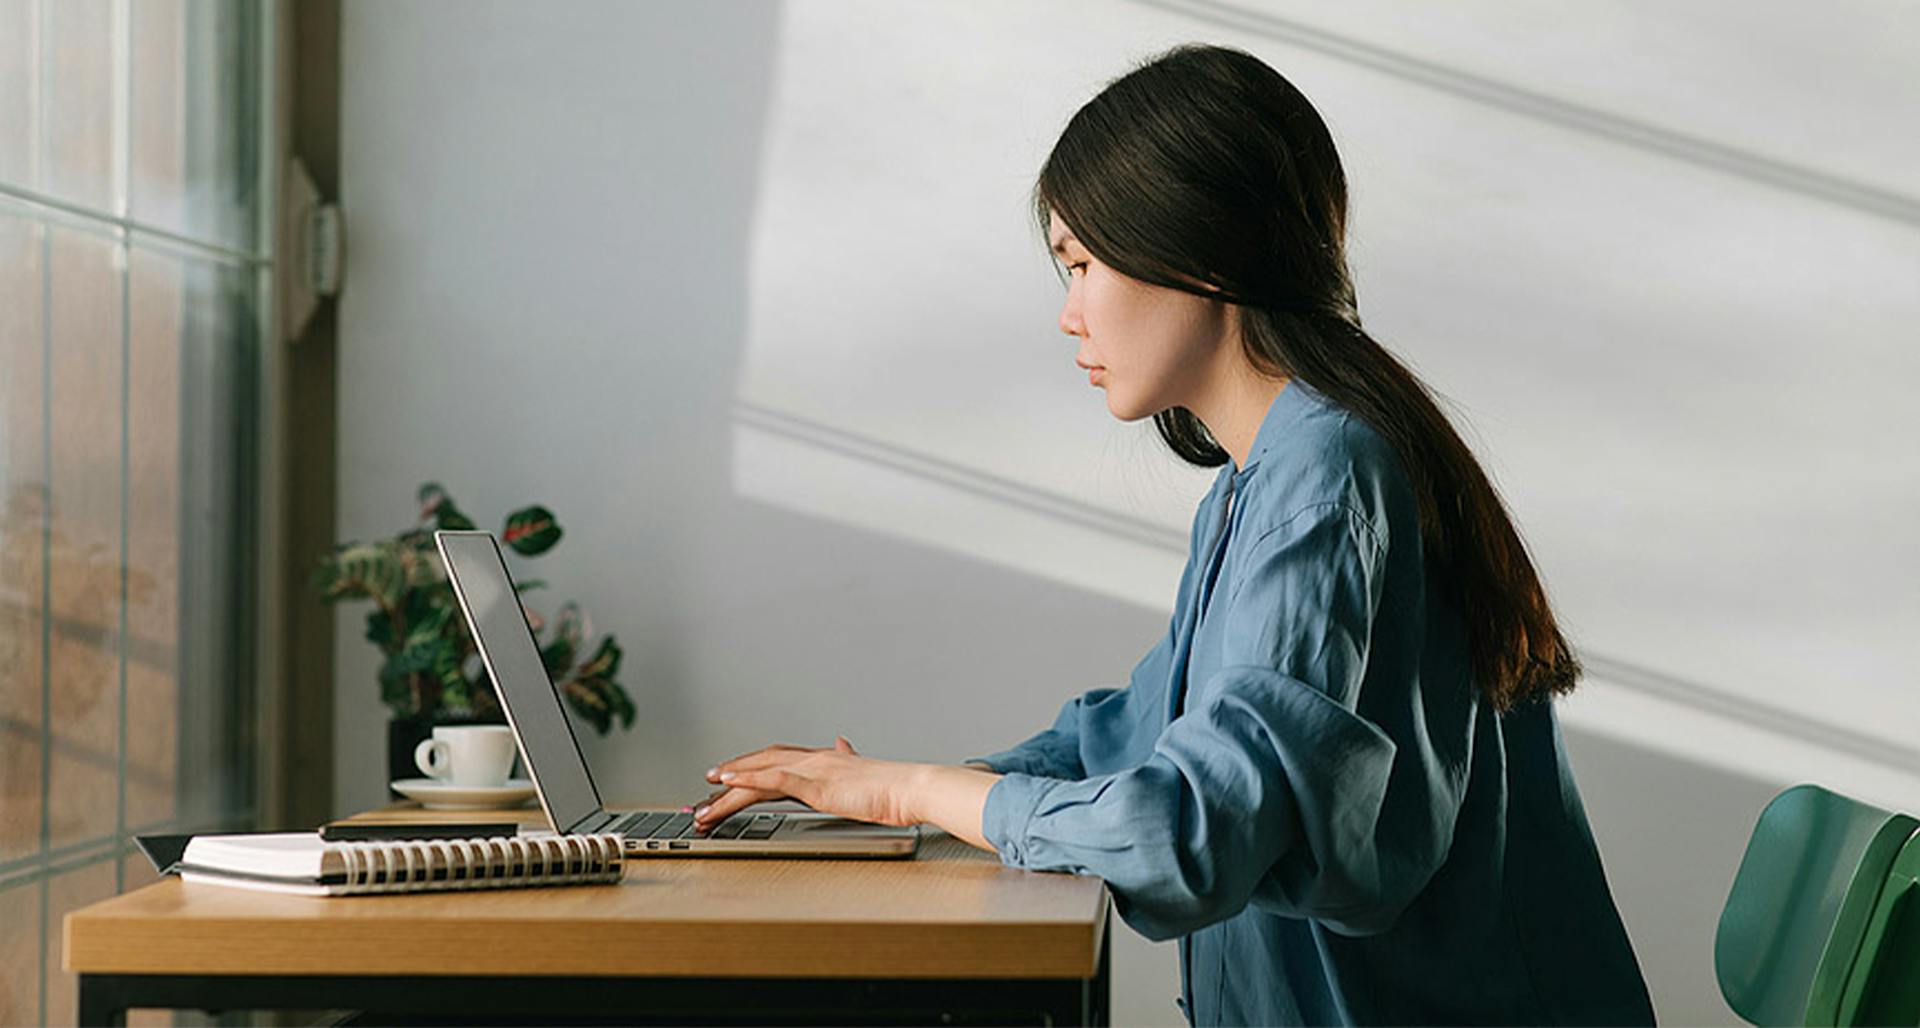 An image of a woman sitting with her laptop.